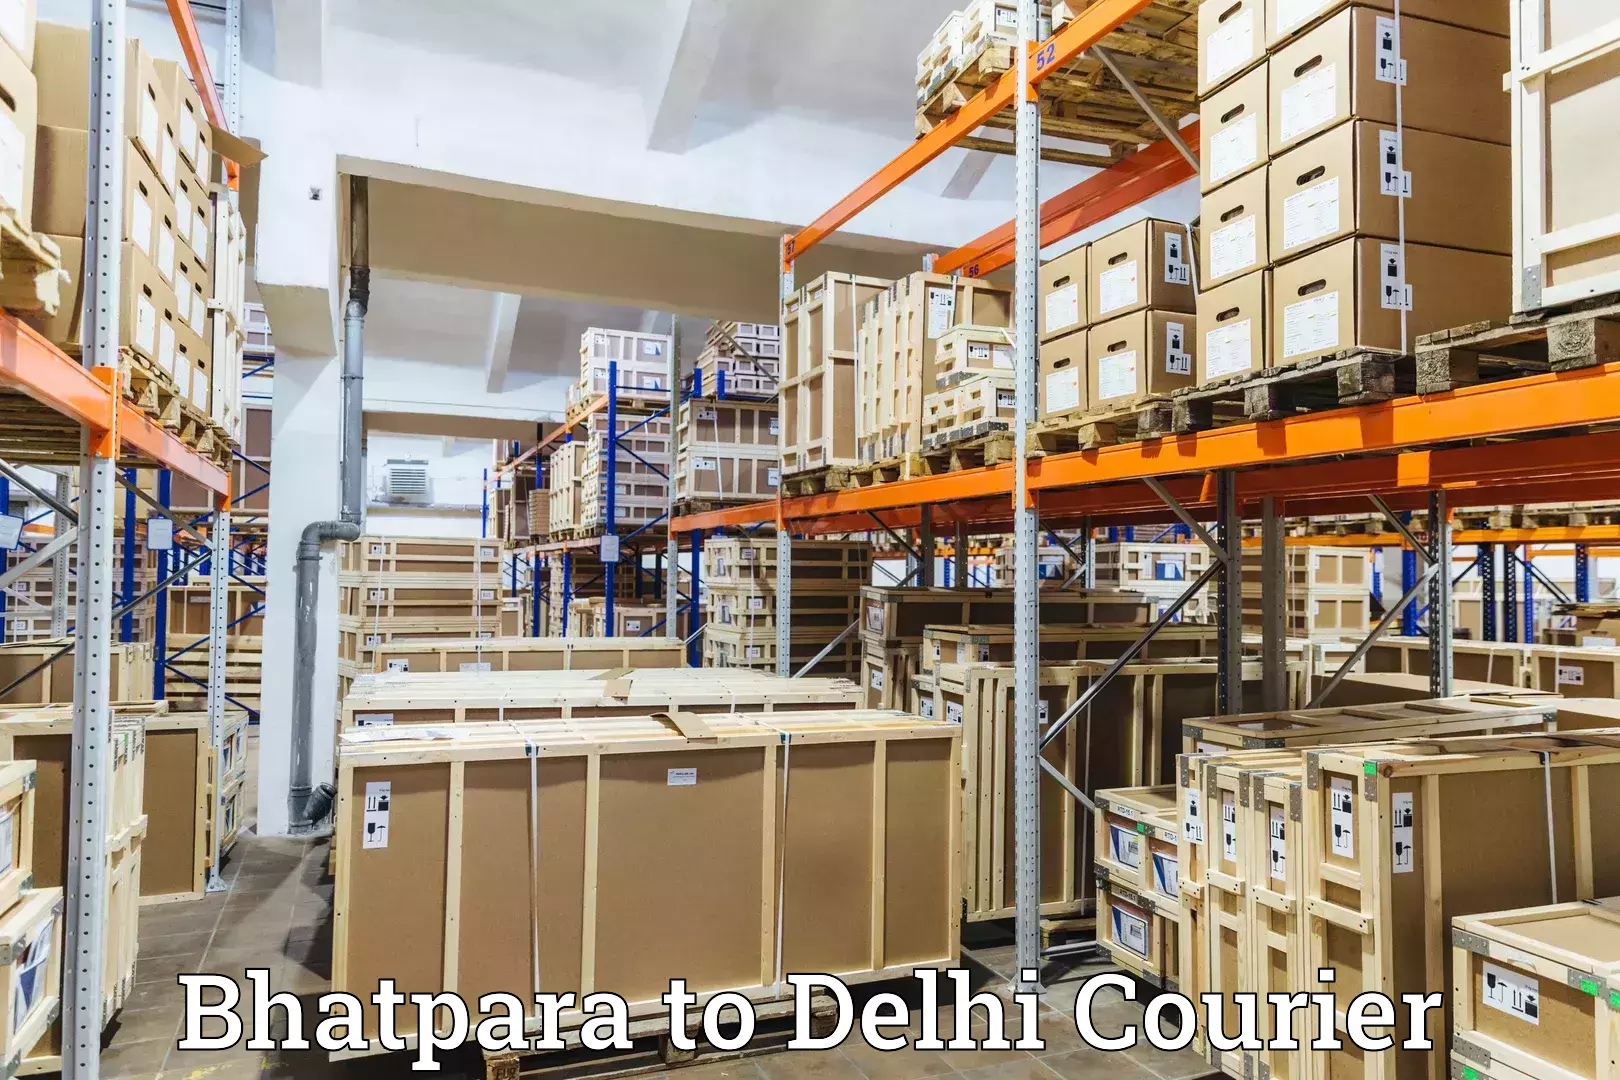 Nationwide parcel services Bhatpara to Lodhi Road